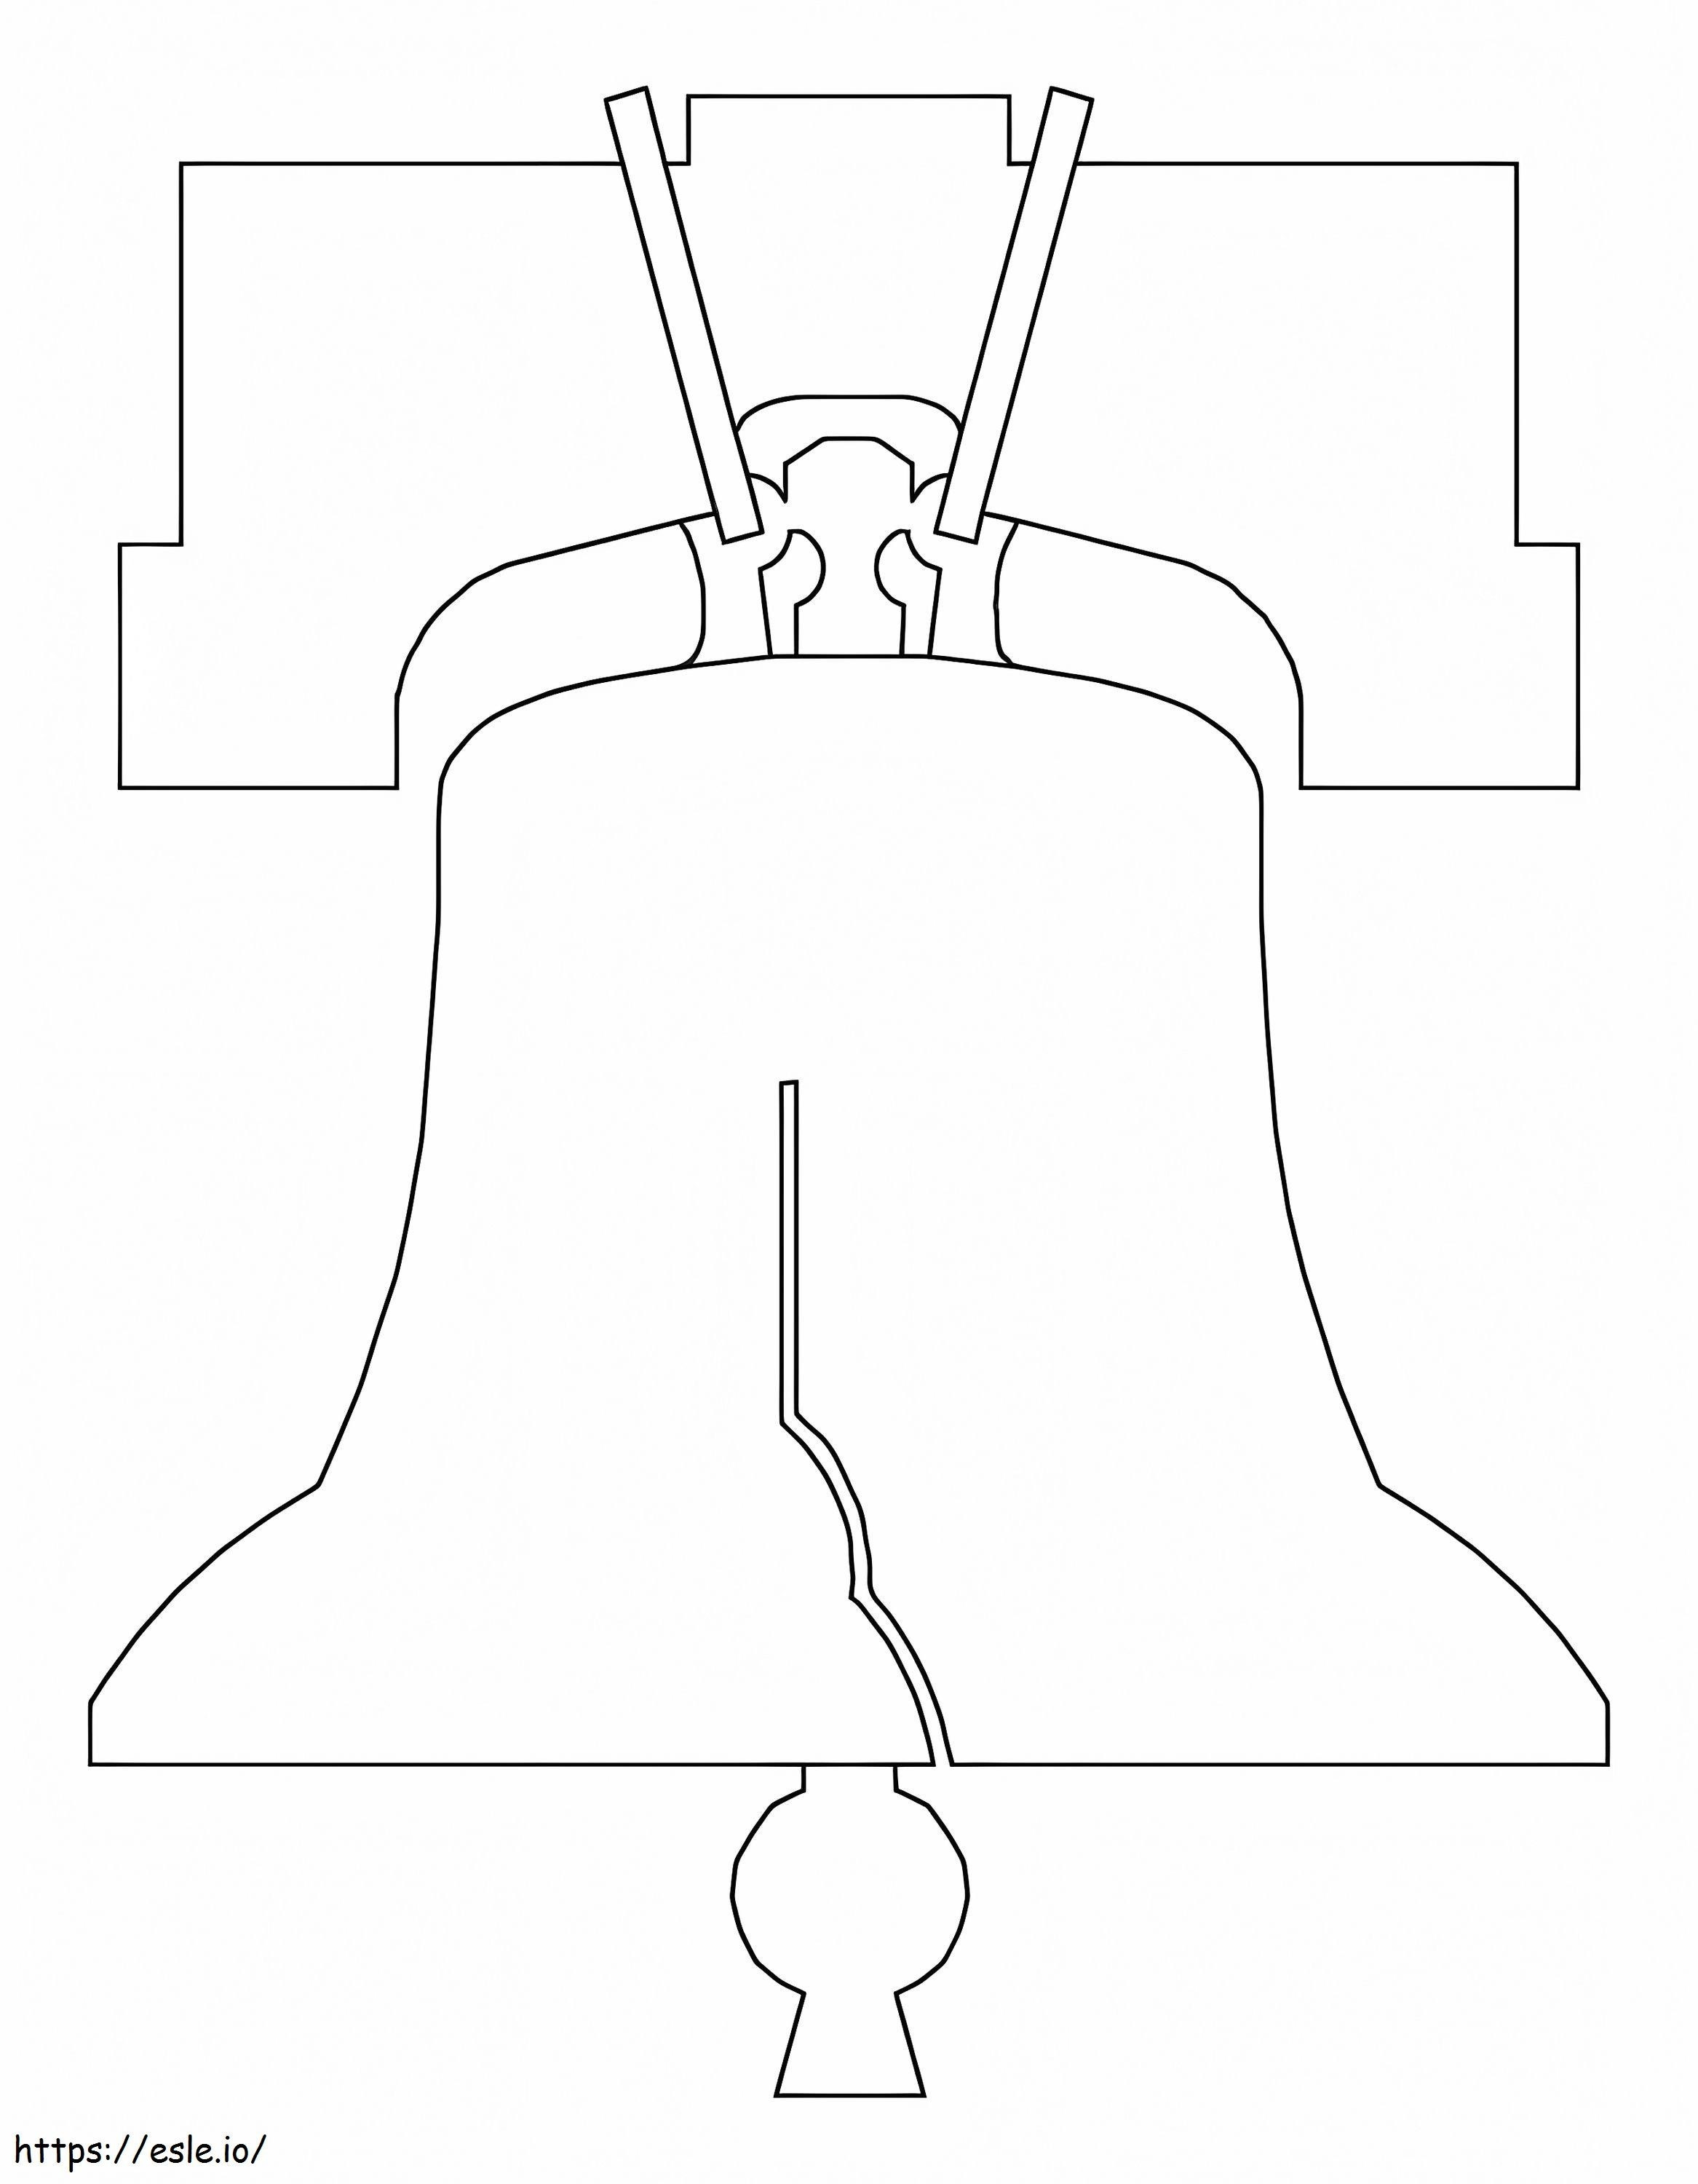 Easy Liberty Bell coloring page